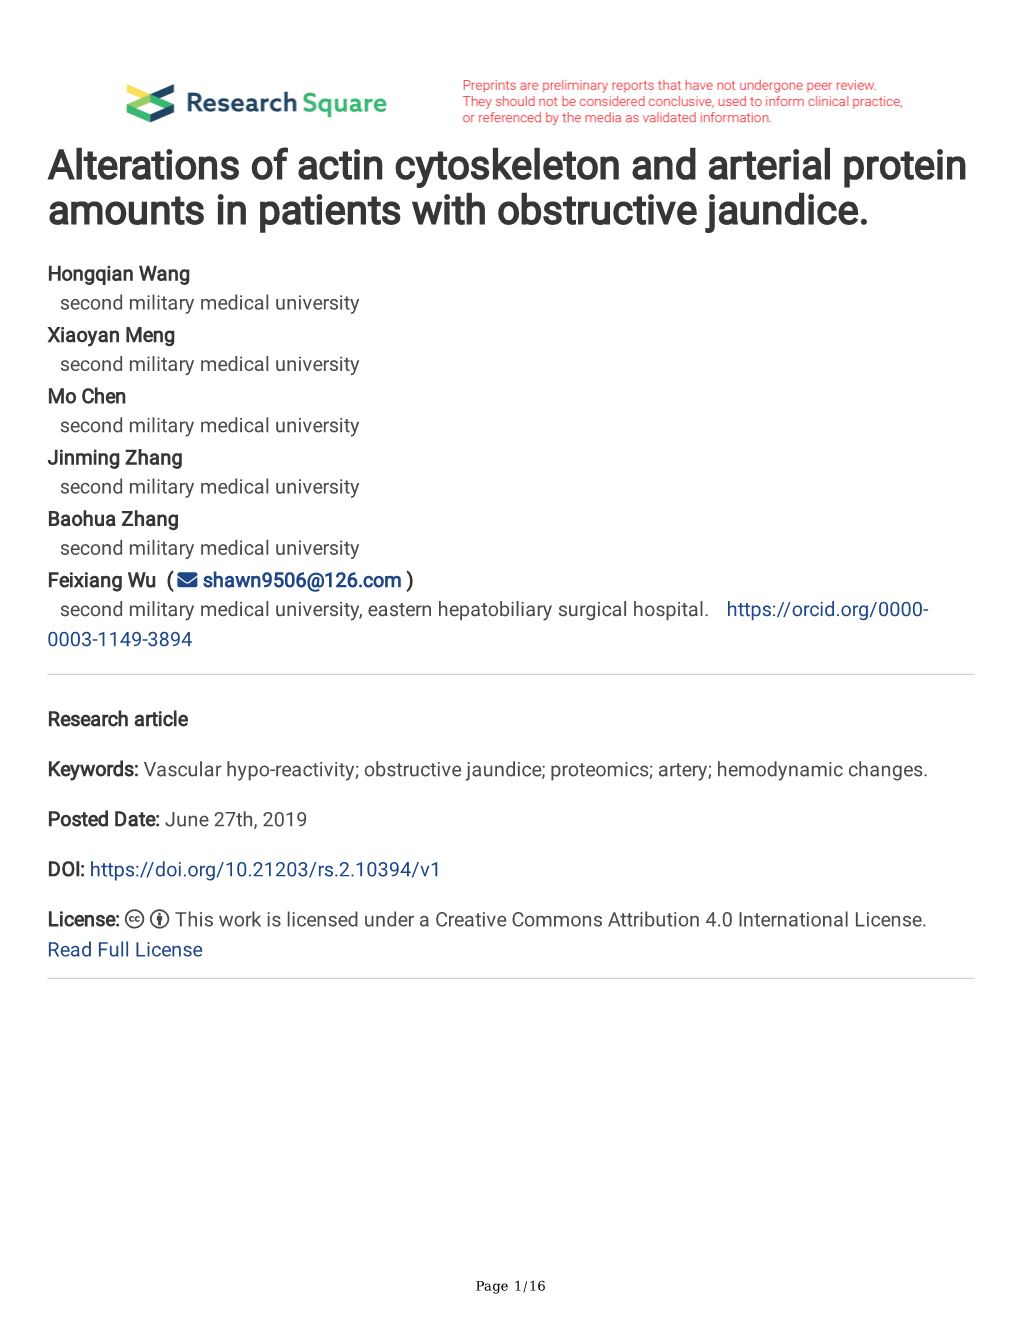 Alterations of Actin Cytoskeleton and Arterial Protein Amounts in Patients with Obstructive Jaundice